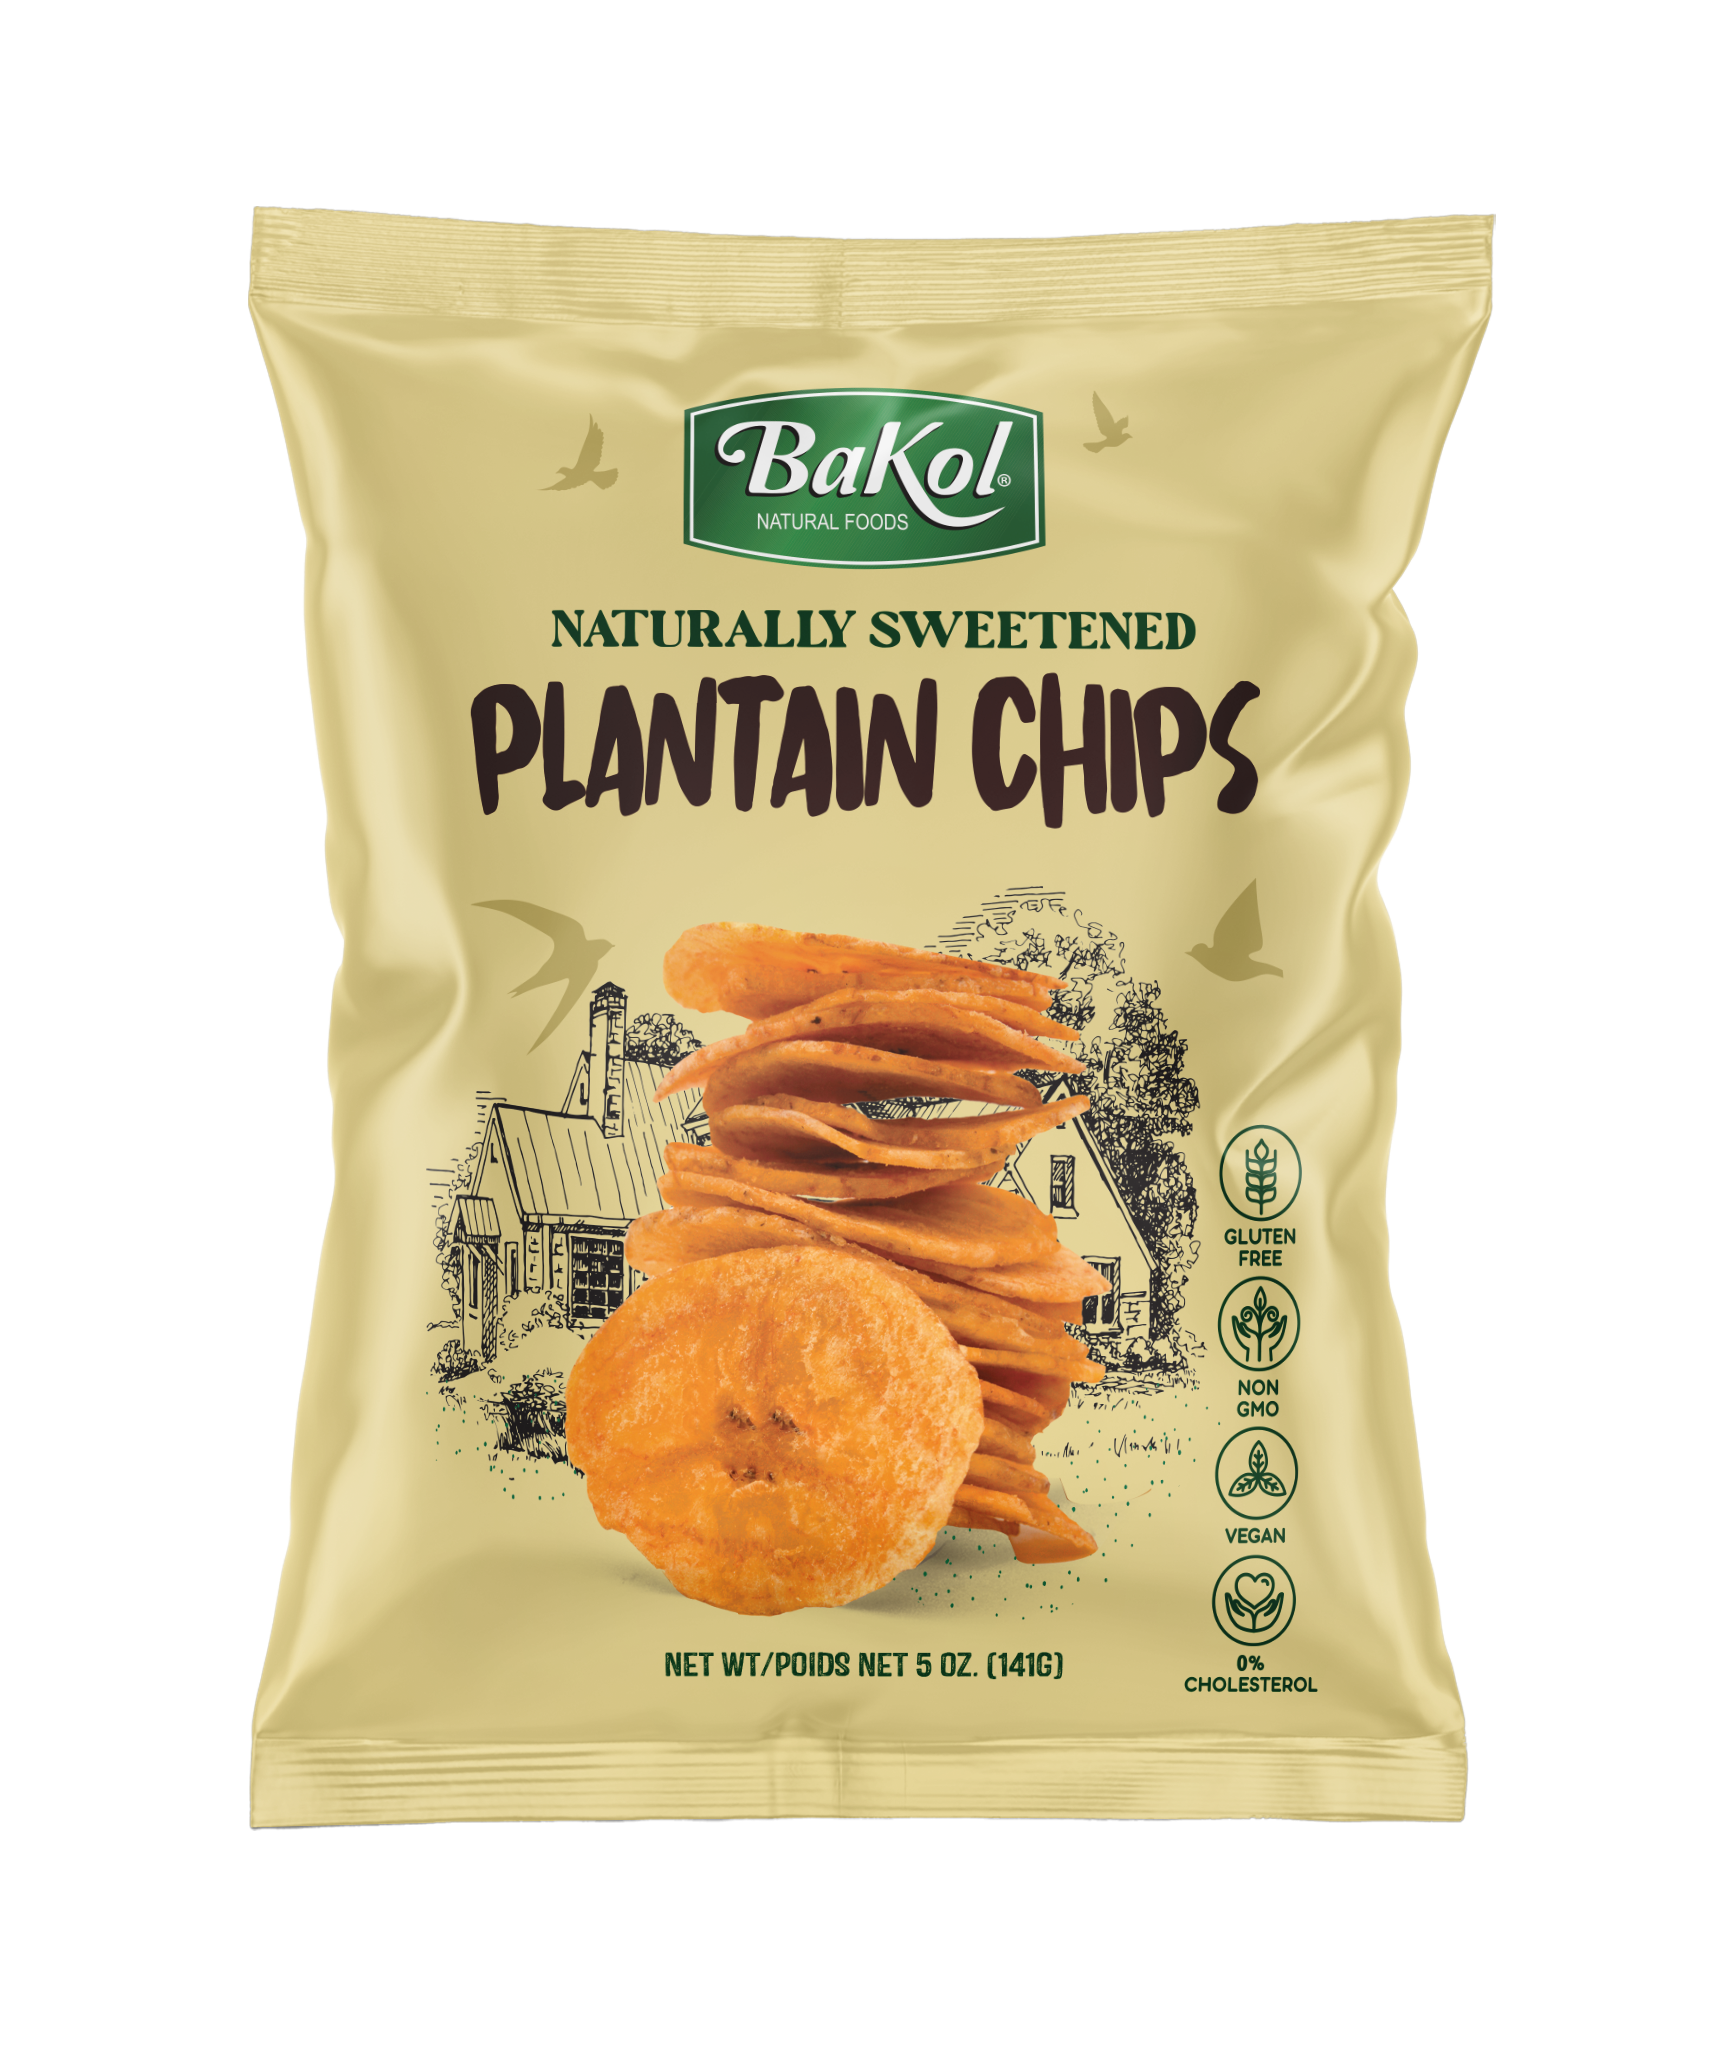 BAKOL NATURALLY SWEETENED PLANTAIN CHIPS LARGE